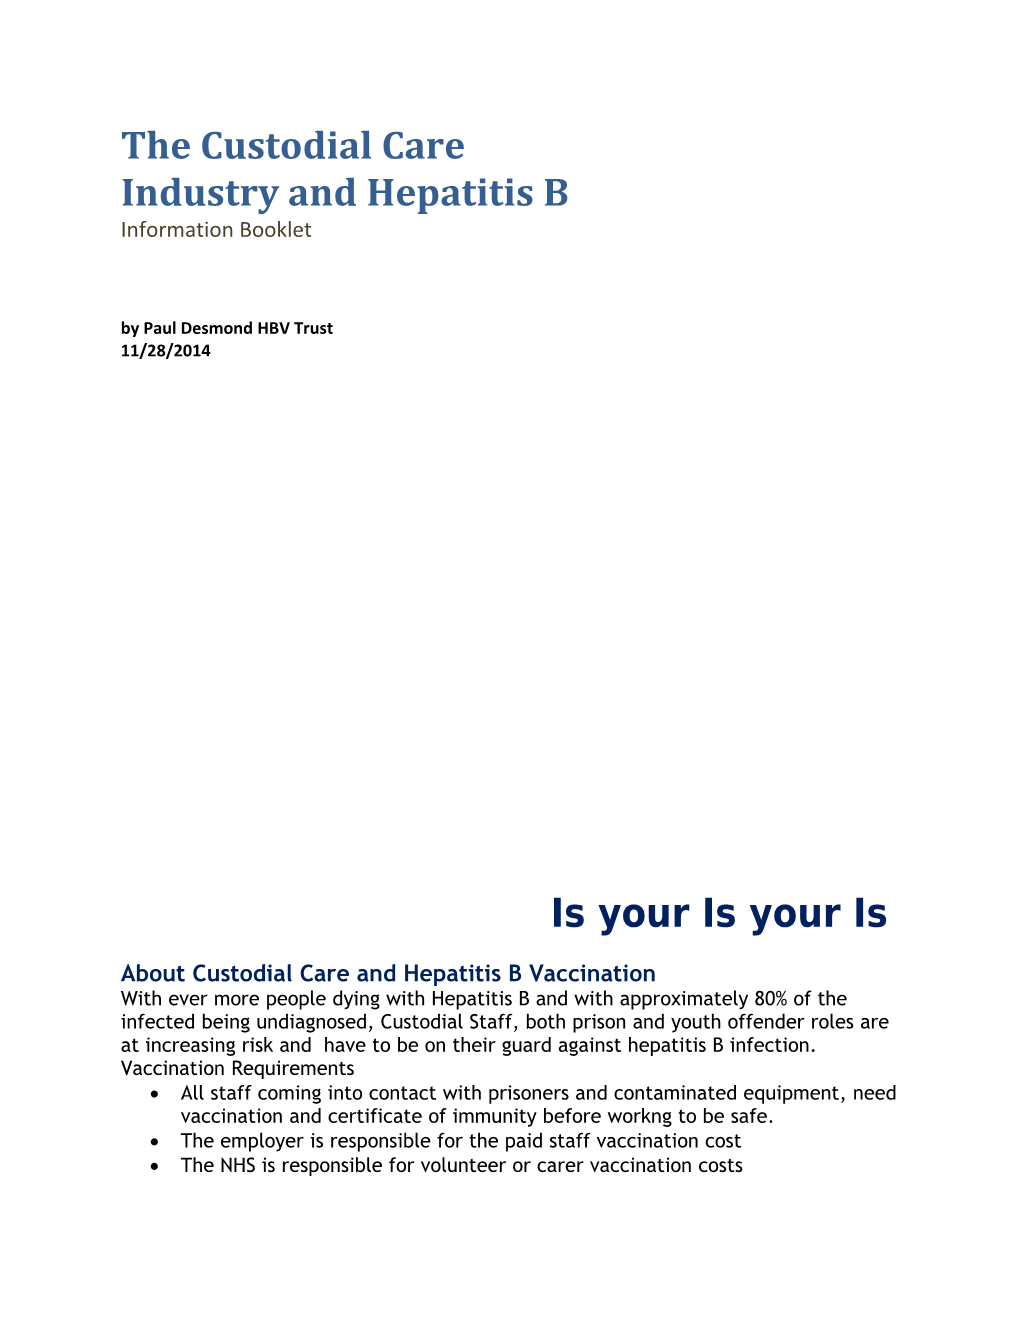 The Custodial Care Industry and Hepatitis B